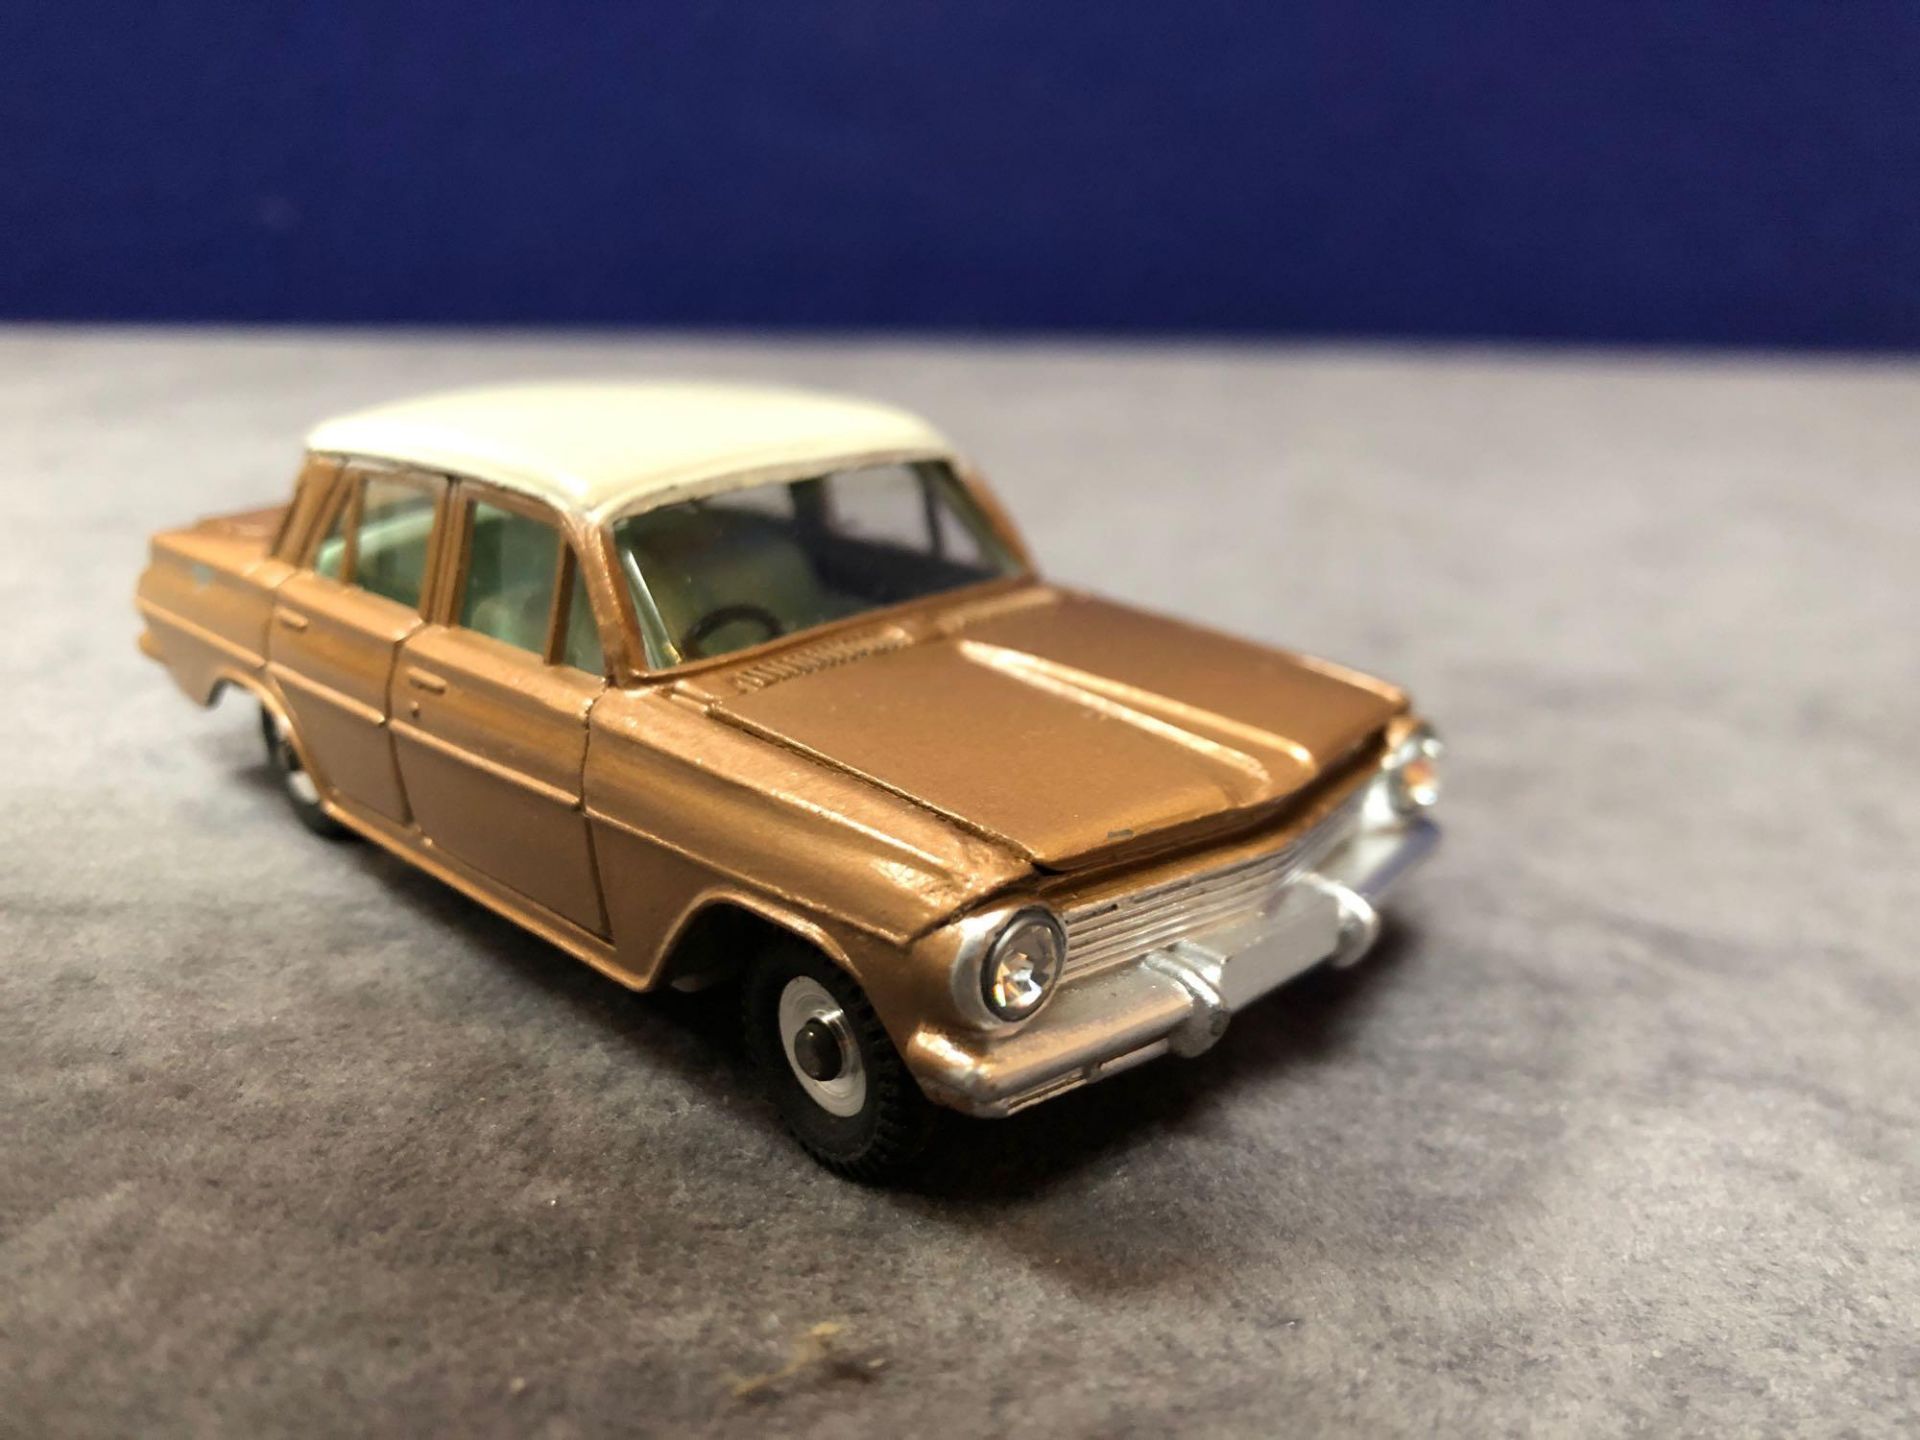 Dinky #196 Holden Special Sedan Bronze/White Or Turquoise/White - Jewelled Headlights (No - Image 2 of 4